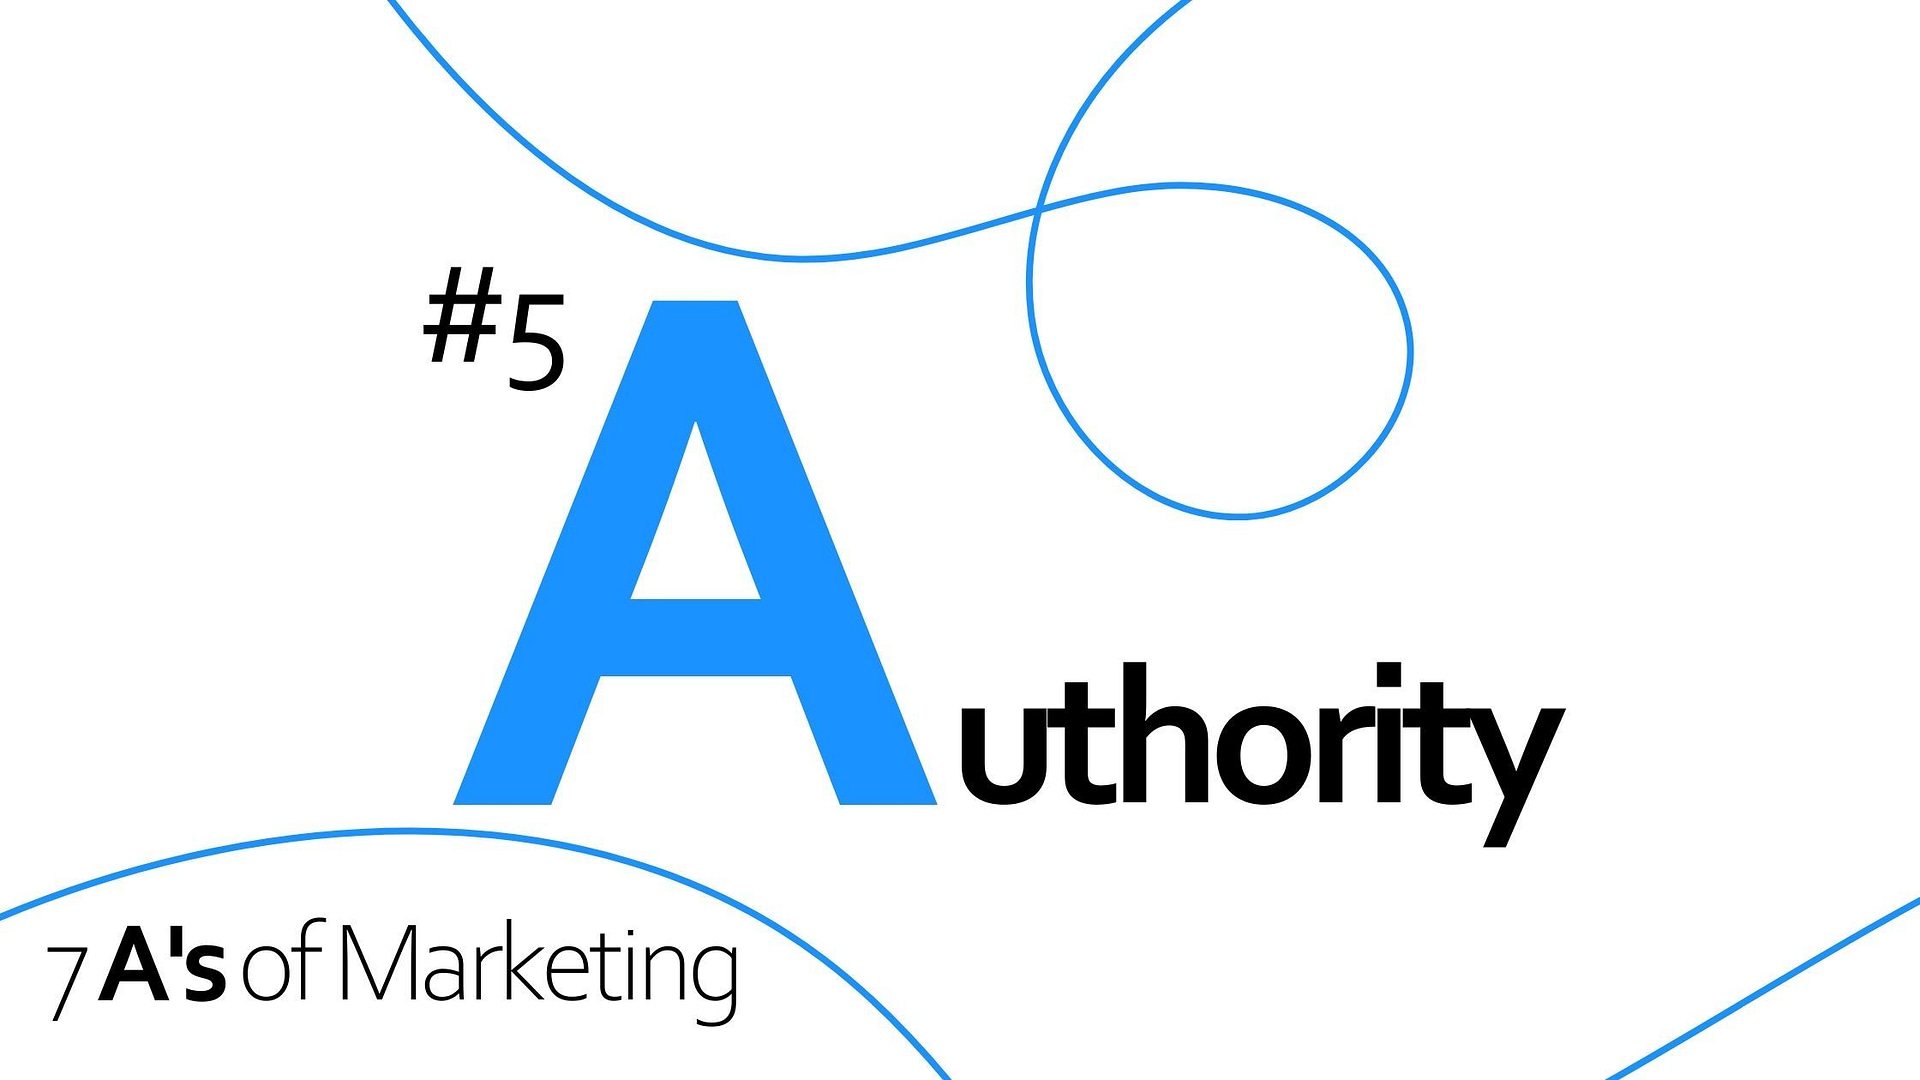 7 A's of Marketing - #5 Authority